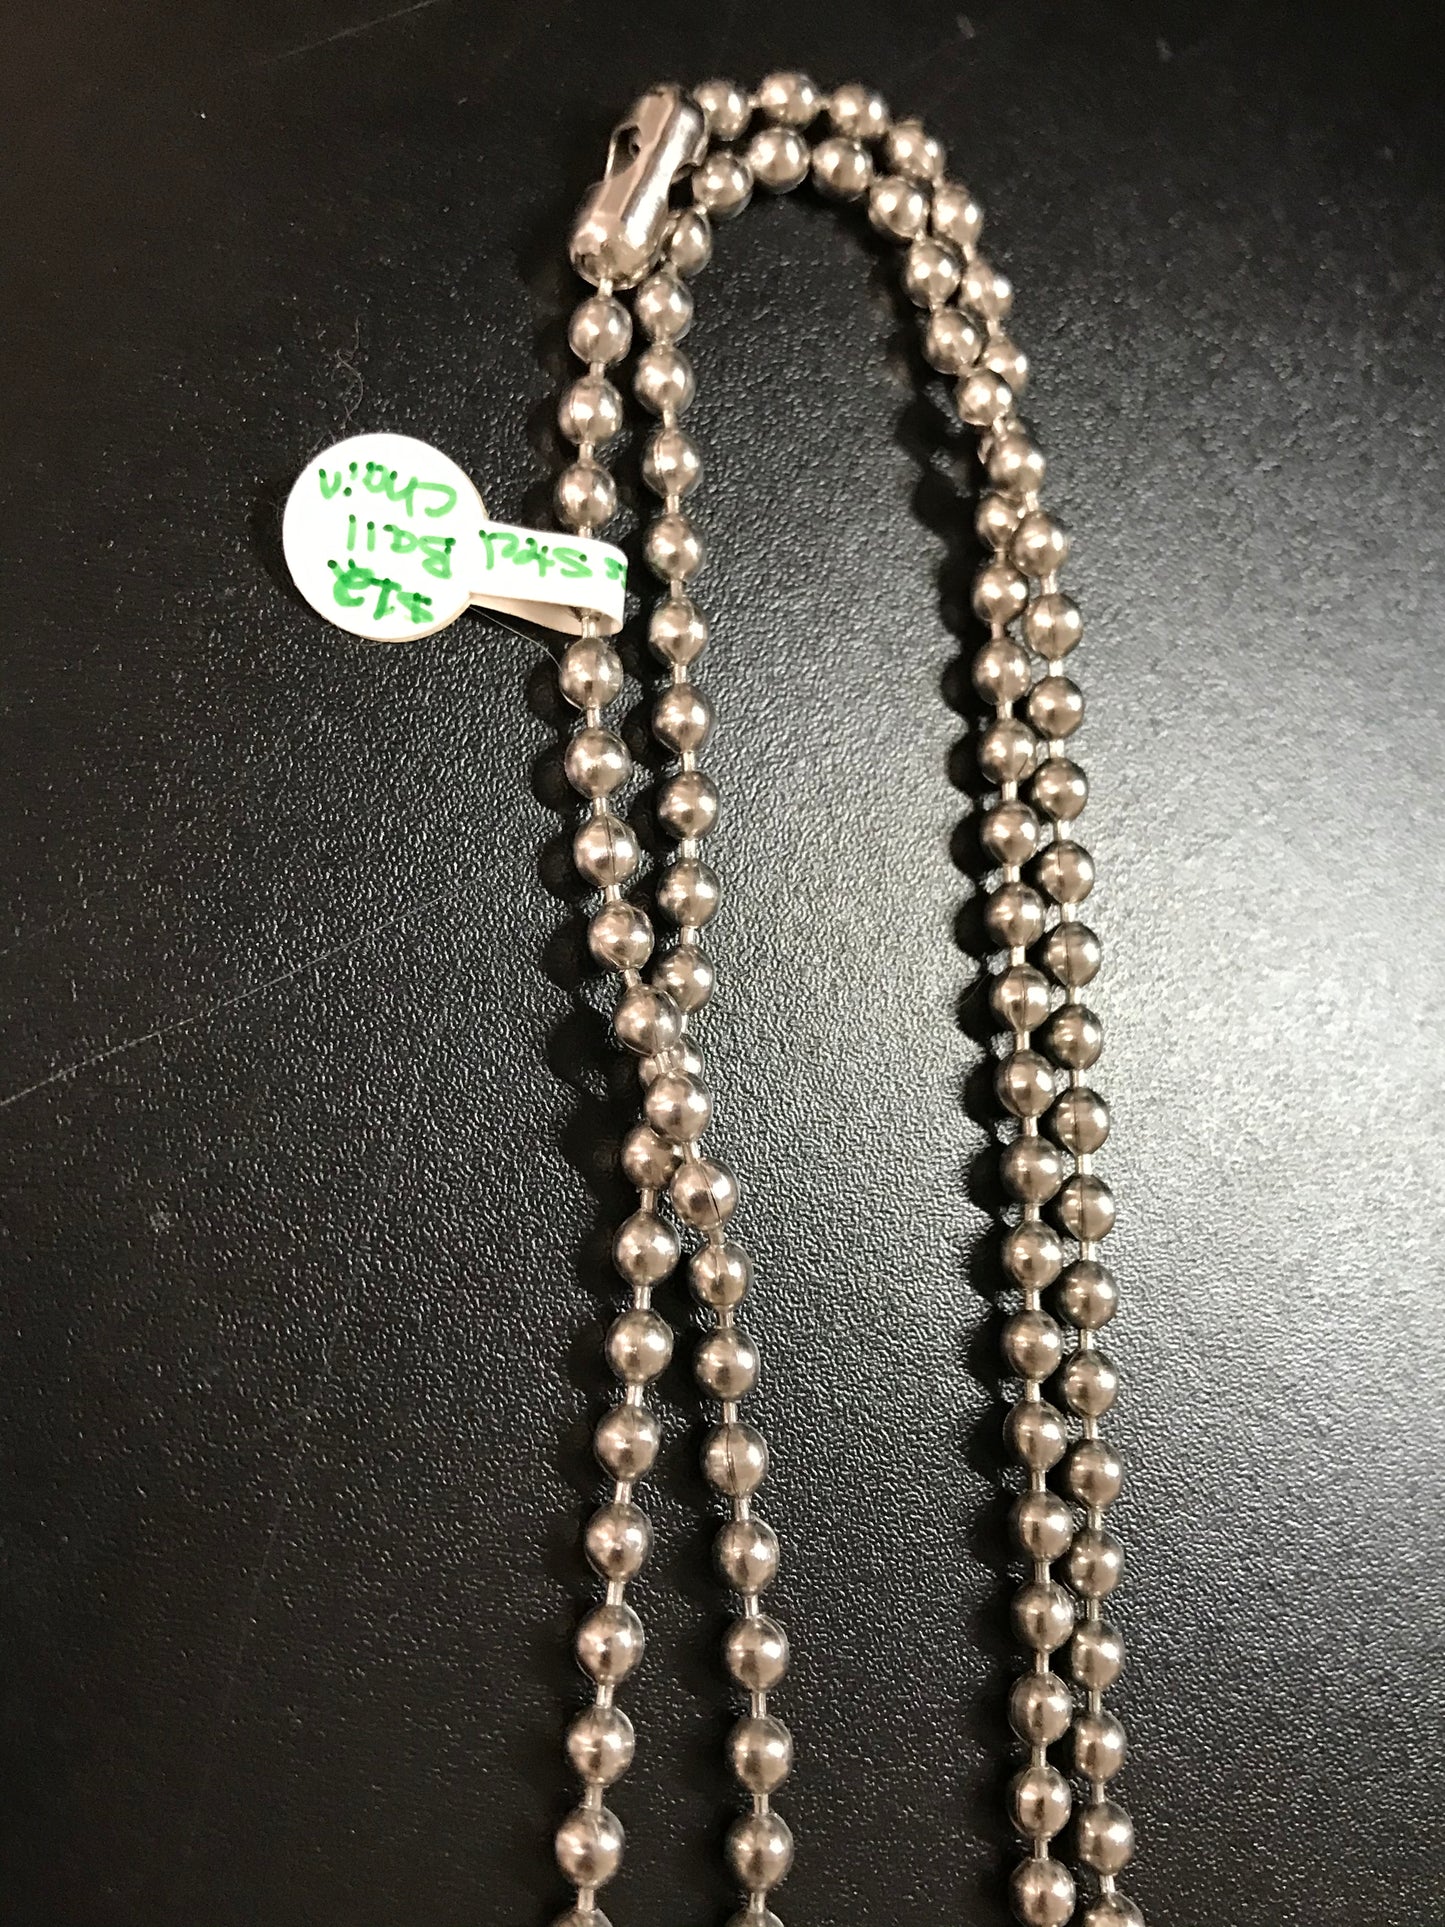 30" 4.4 mm Ball Chain Steel Necklace